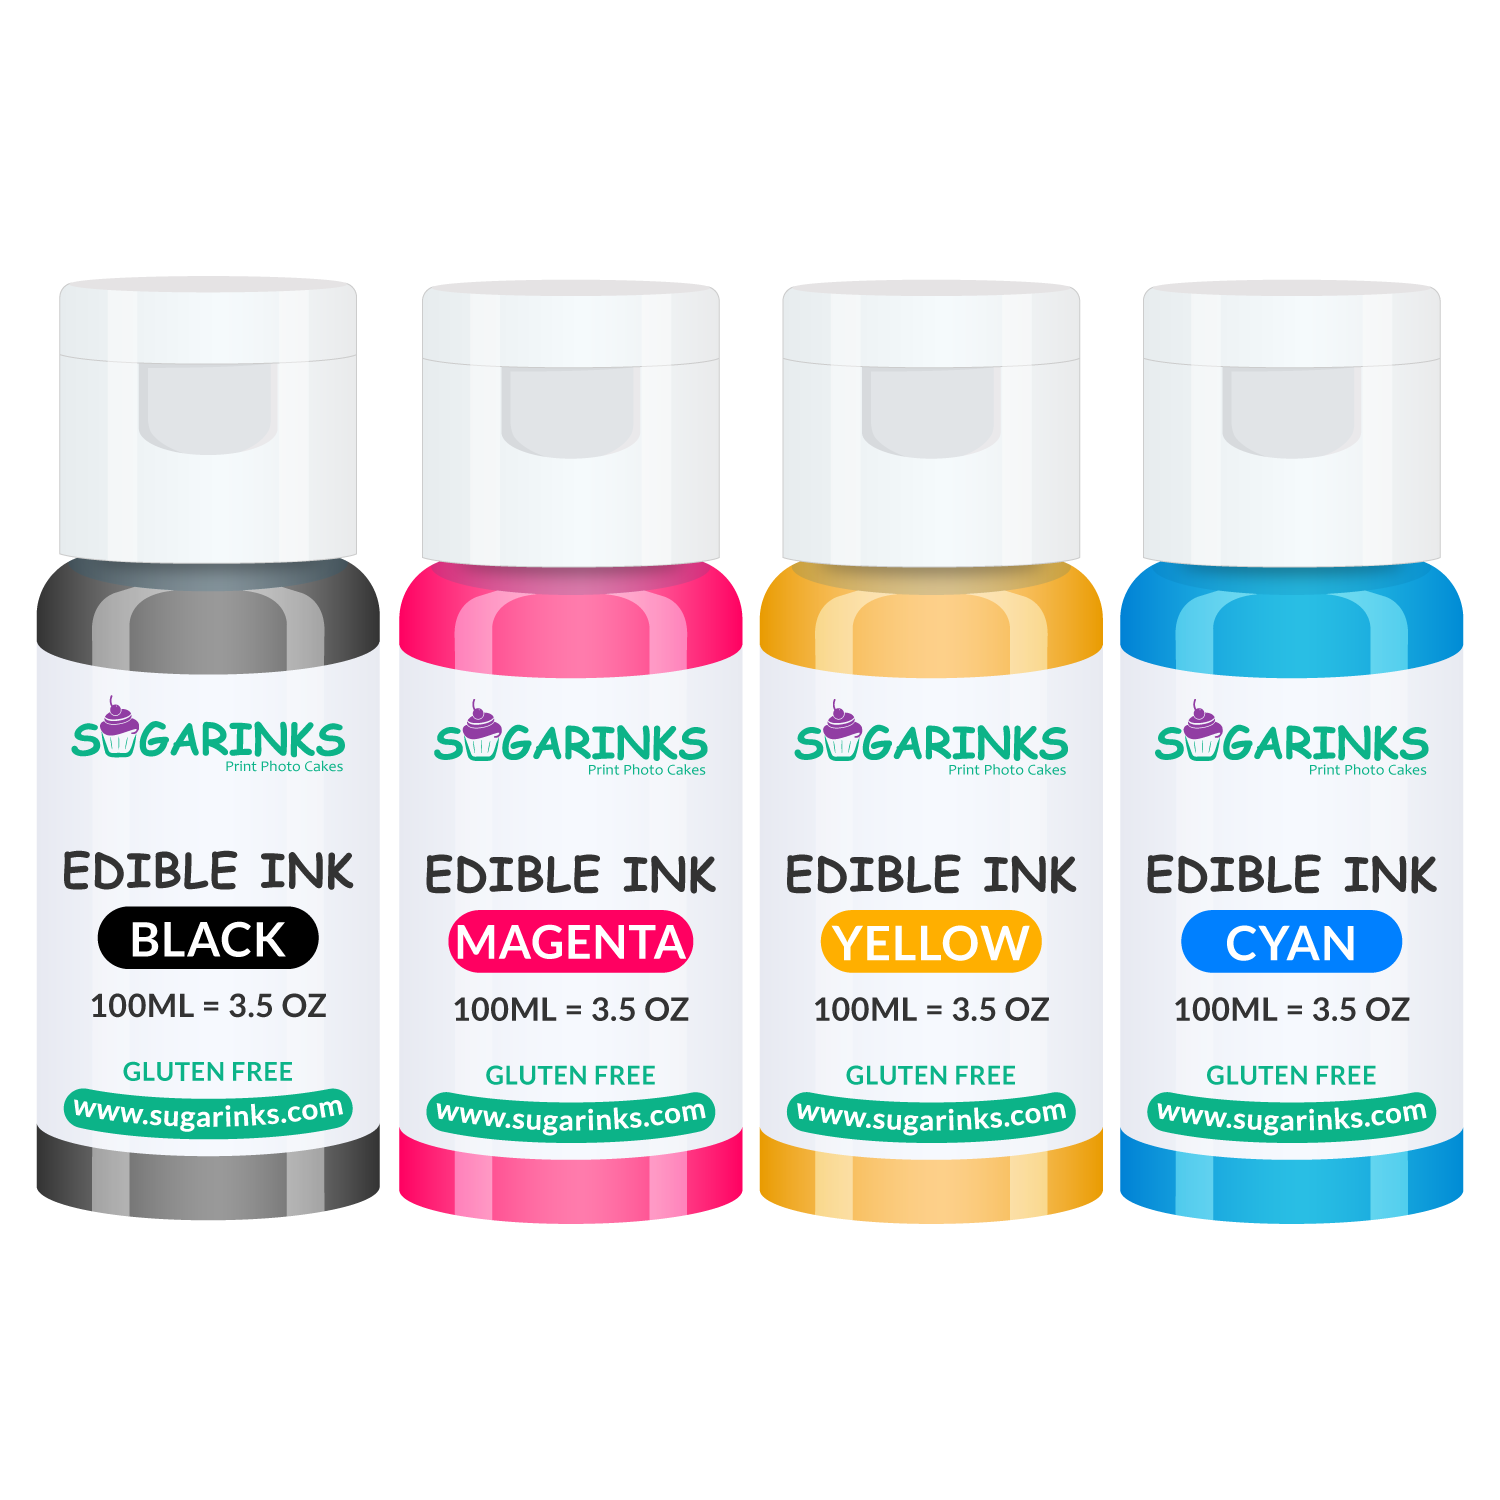 Sugarinks Edible Ink Refill Pack for Epson Edible Printers (100ml/3.5Oz Each) – Black, Cyan, Magenta, and Yellow